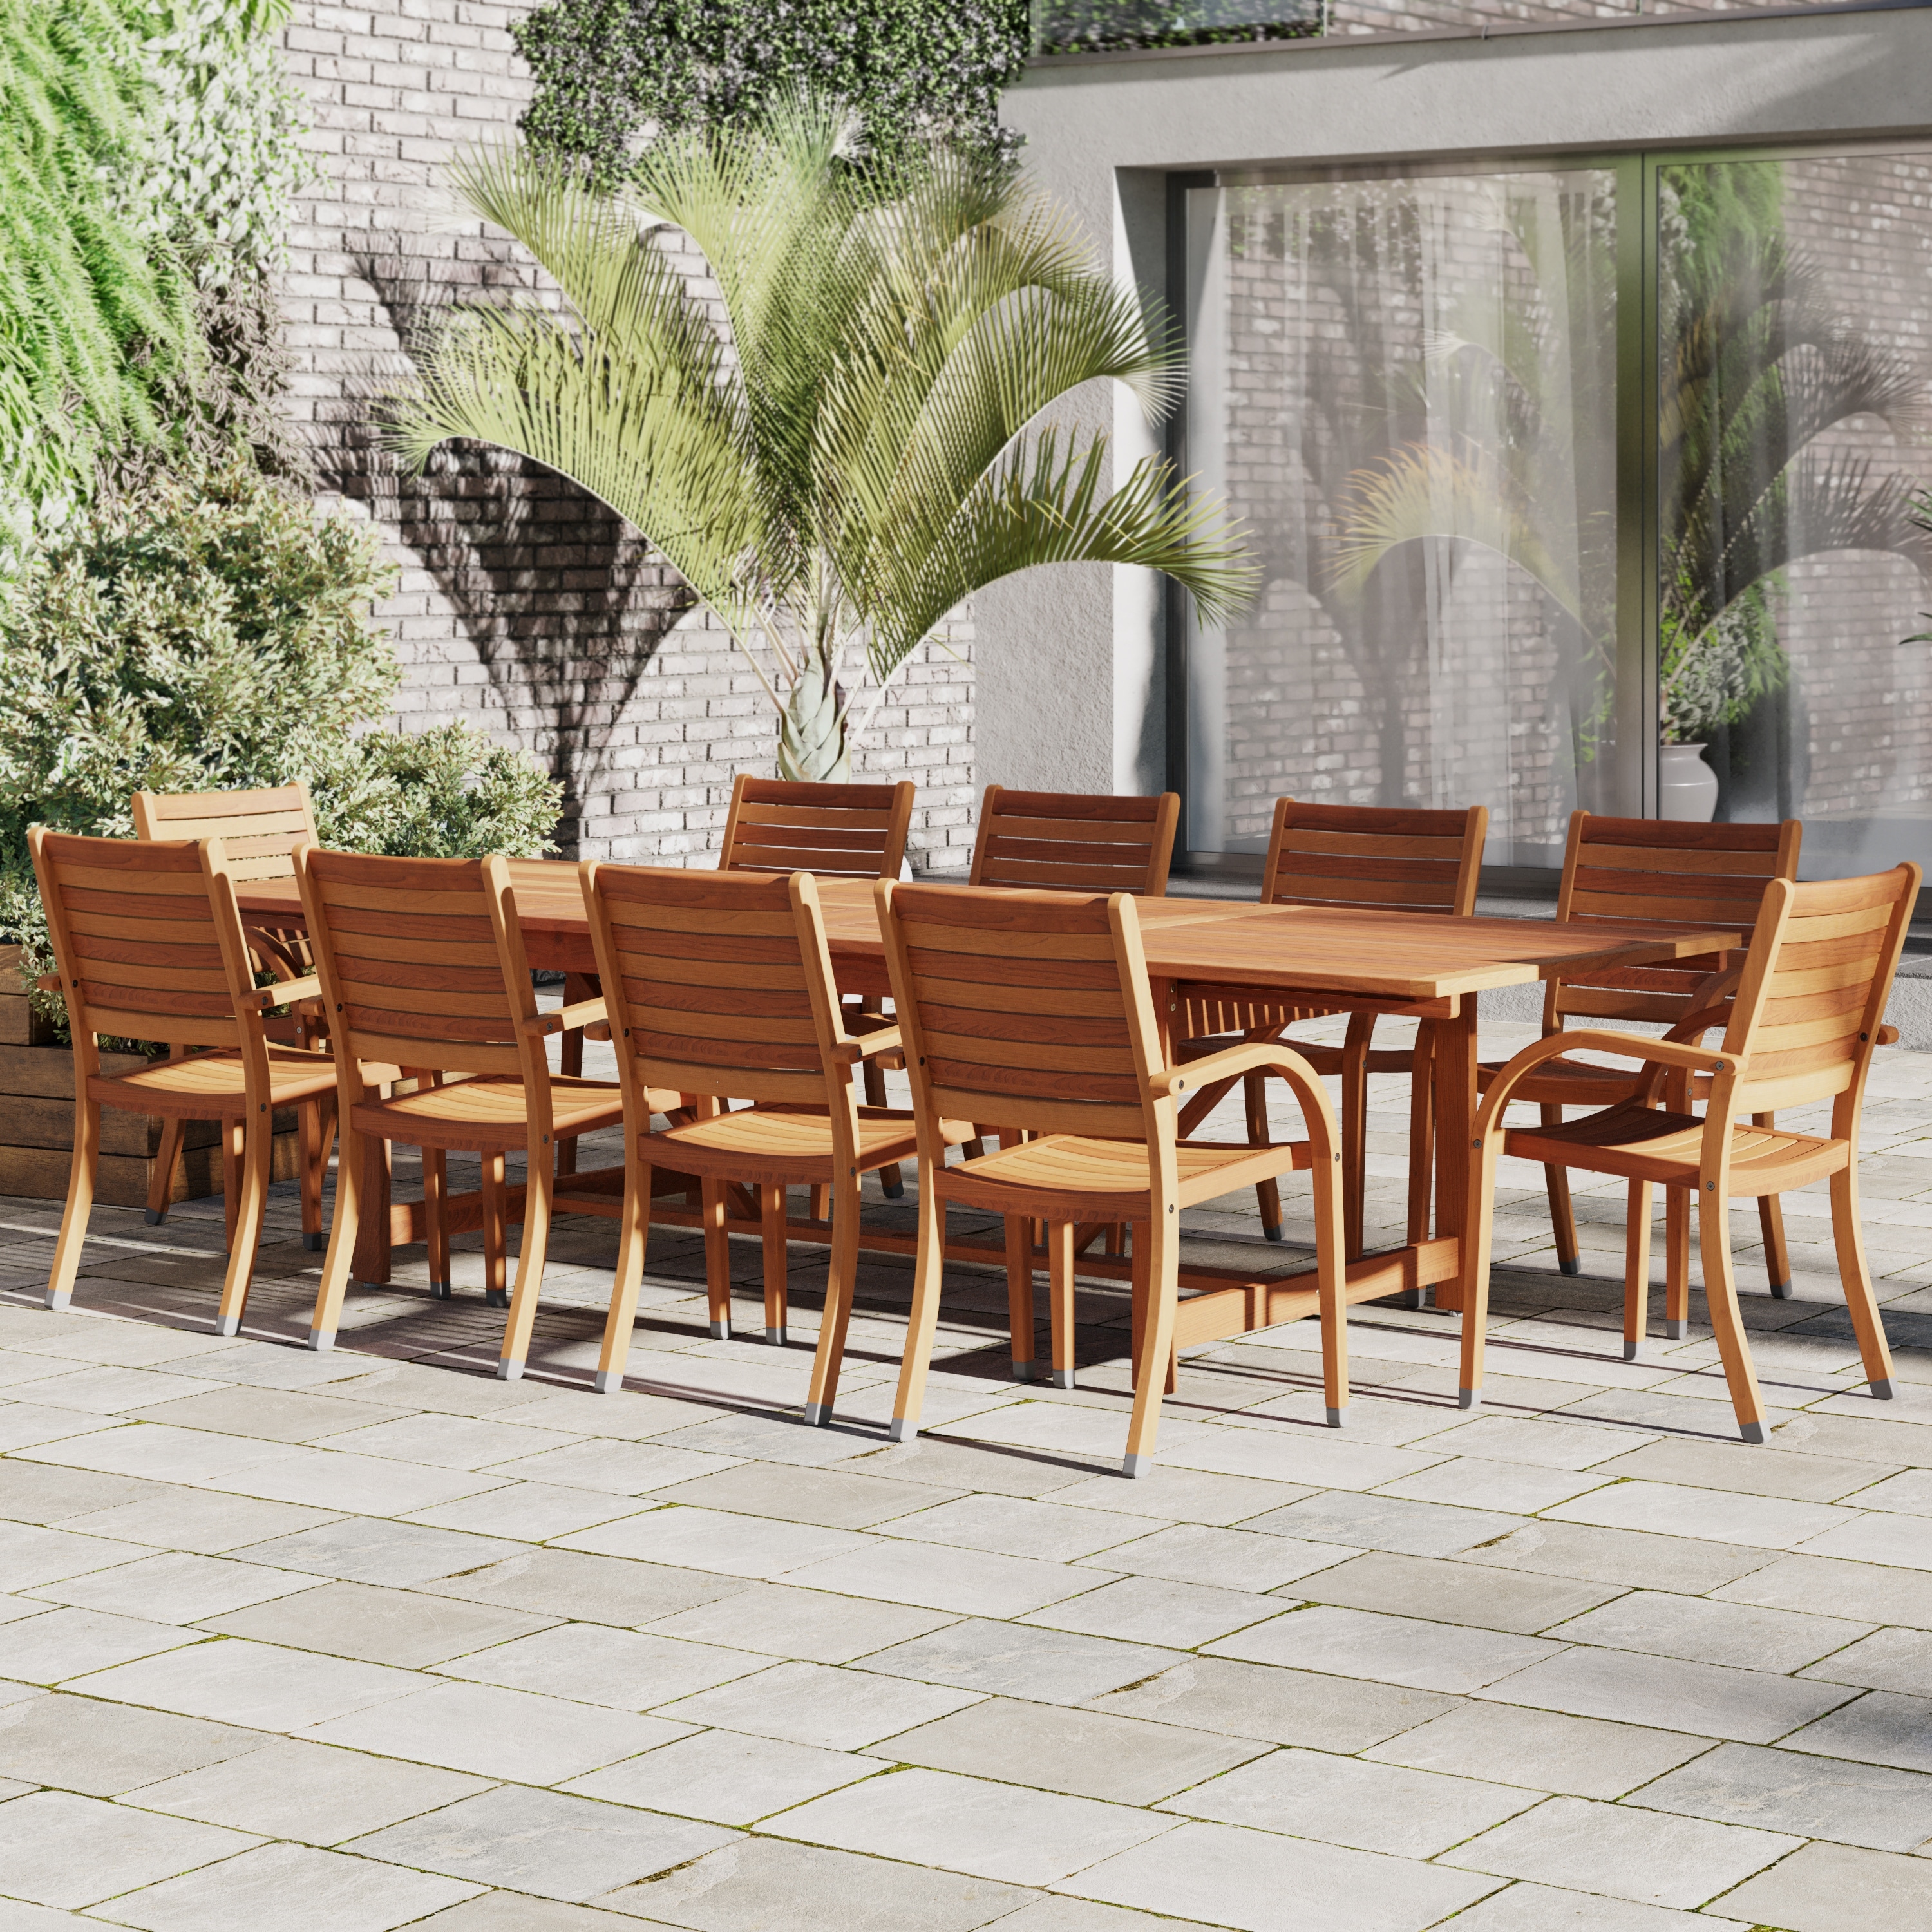 Amazonia 11pc Fsc Certified Wood Brohu Oudoor Patio Dining Set